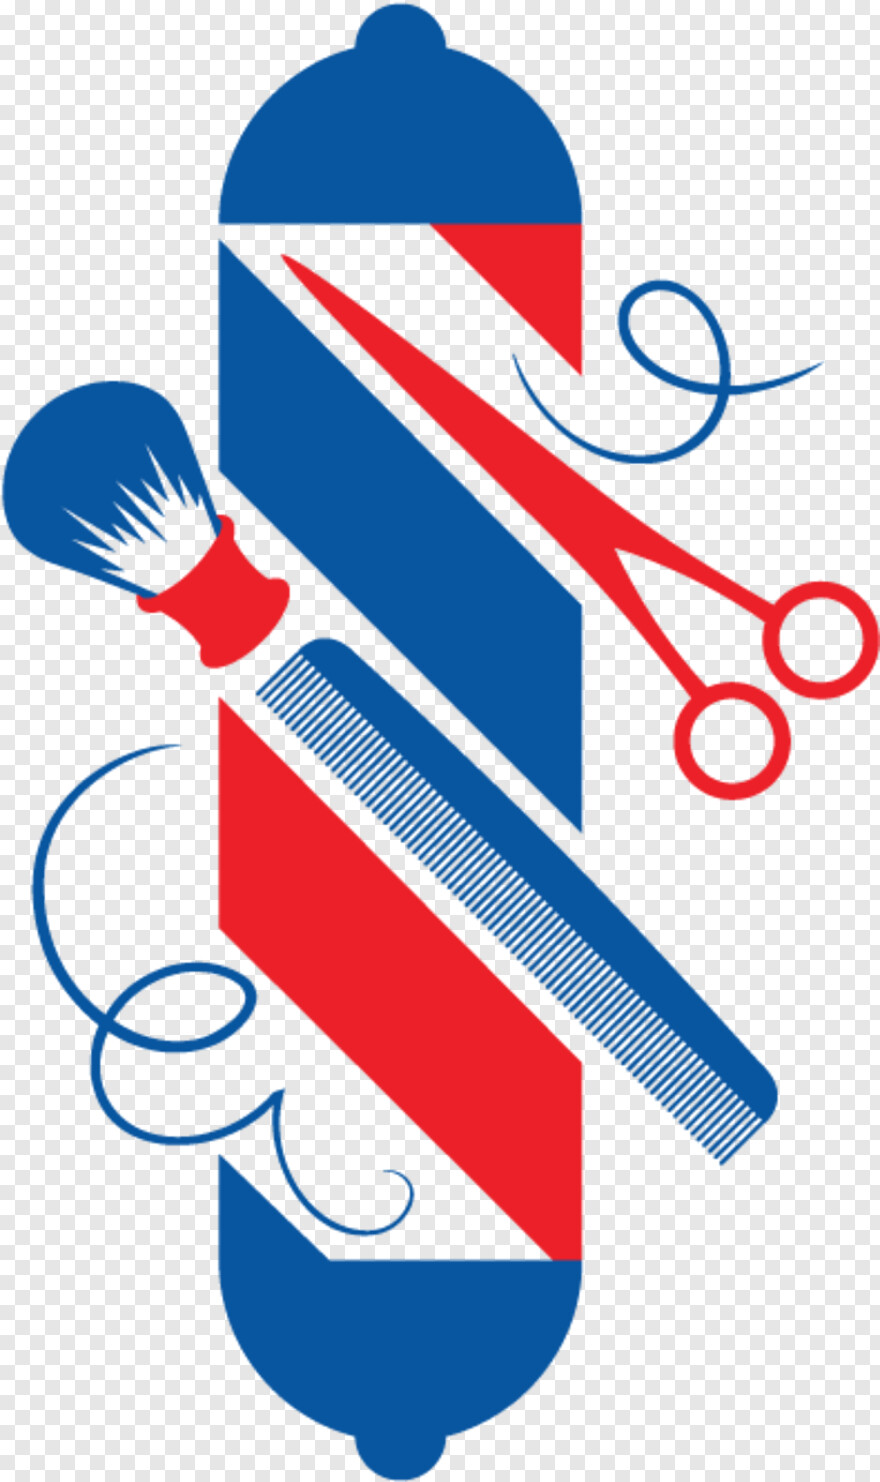 barber-clippers # 404126